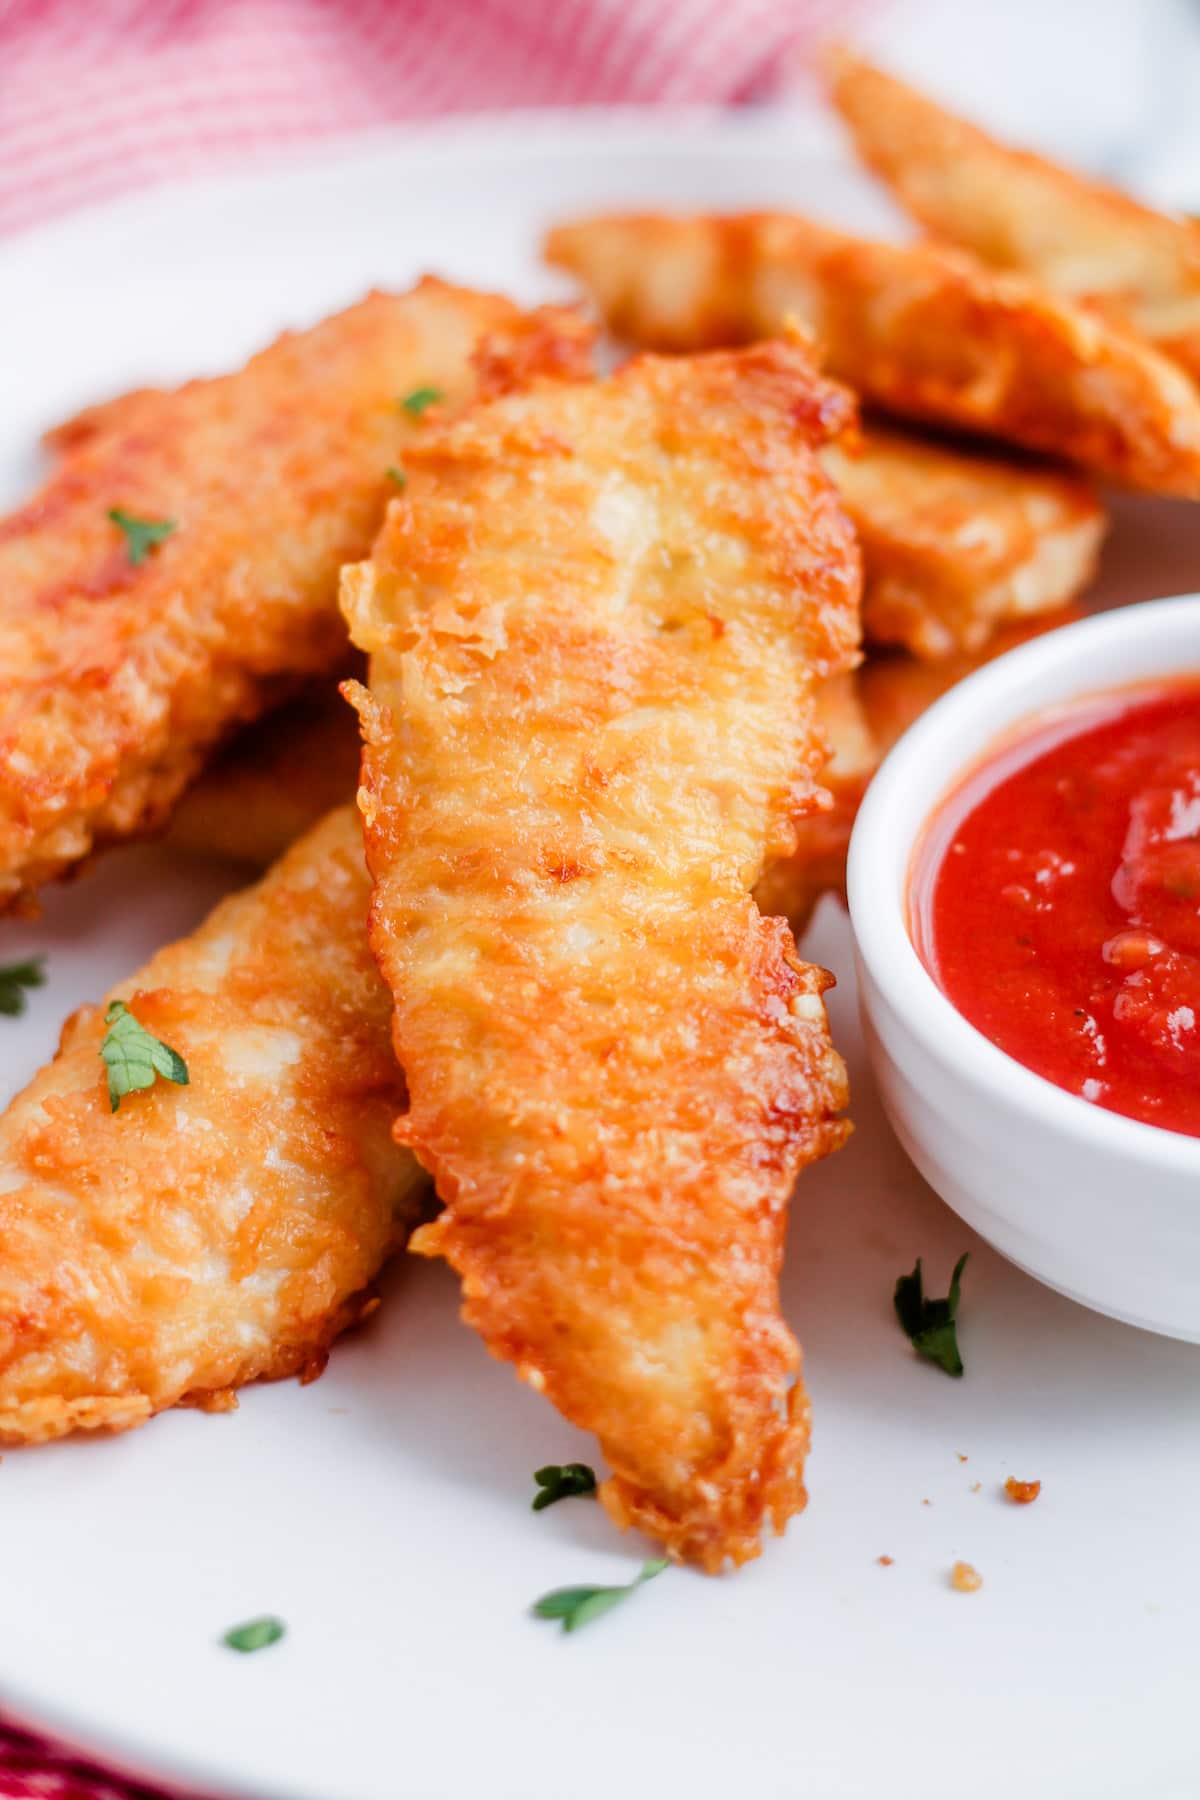 A plate of baked parmesan chicken tenders.